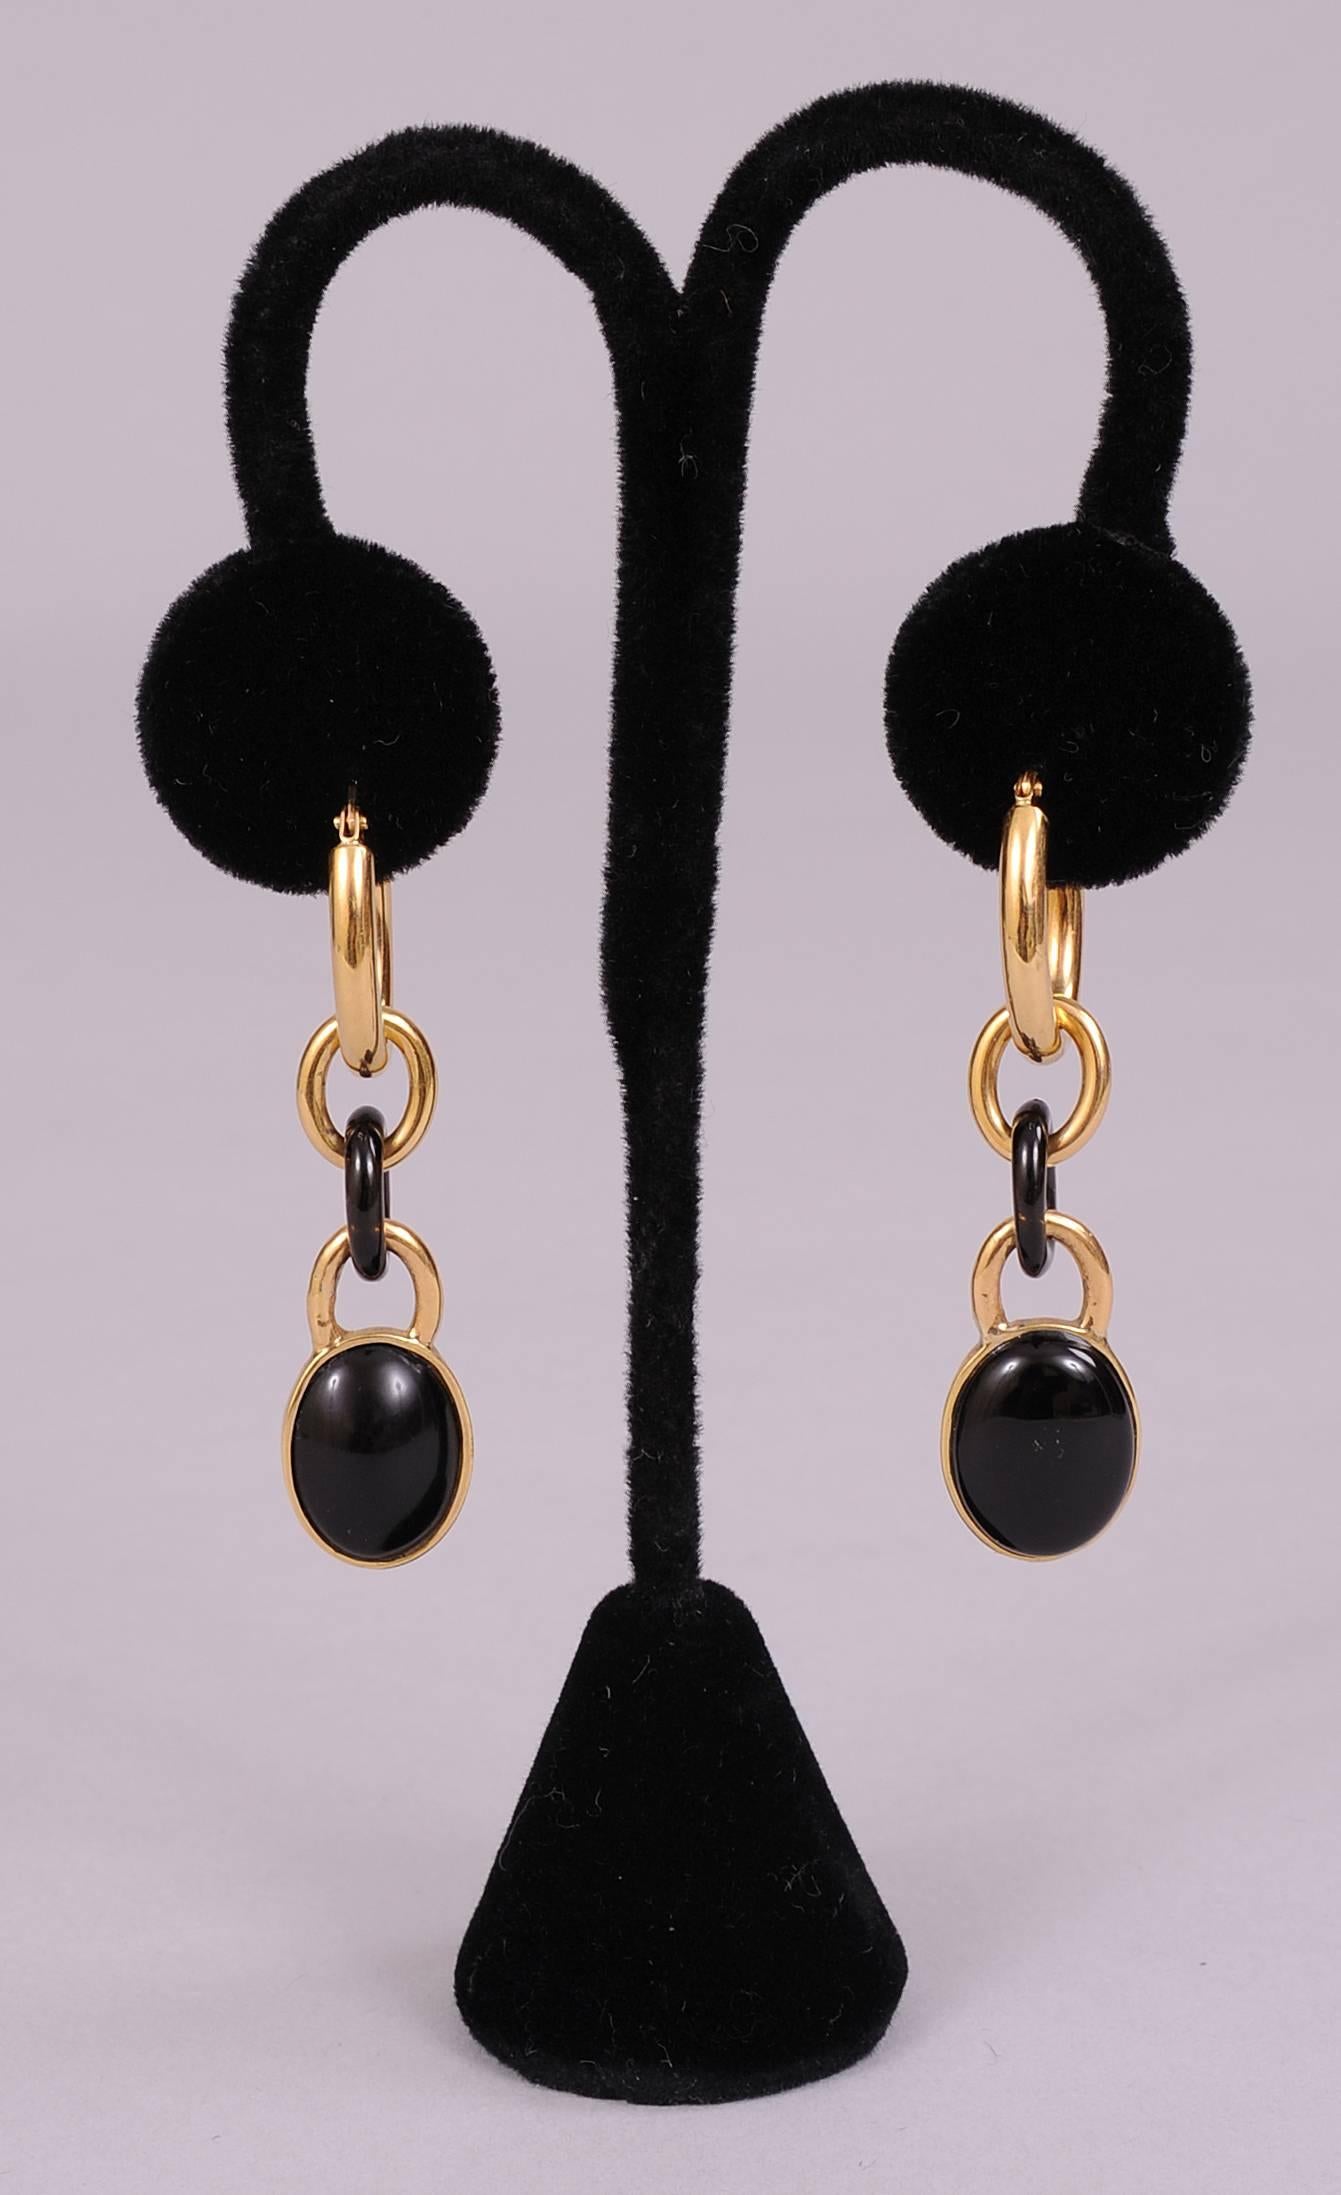 These chic earrings for pierced ears, have a large gold hoop at the top, and two smaller gold hoops with an onyx hoop in the middle . A large oval polished onyx stone is set in gold and suspended from the last hoop. The earrings are stamped Italy